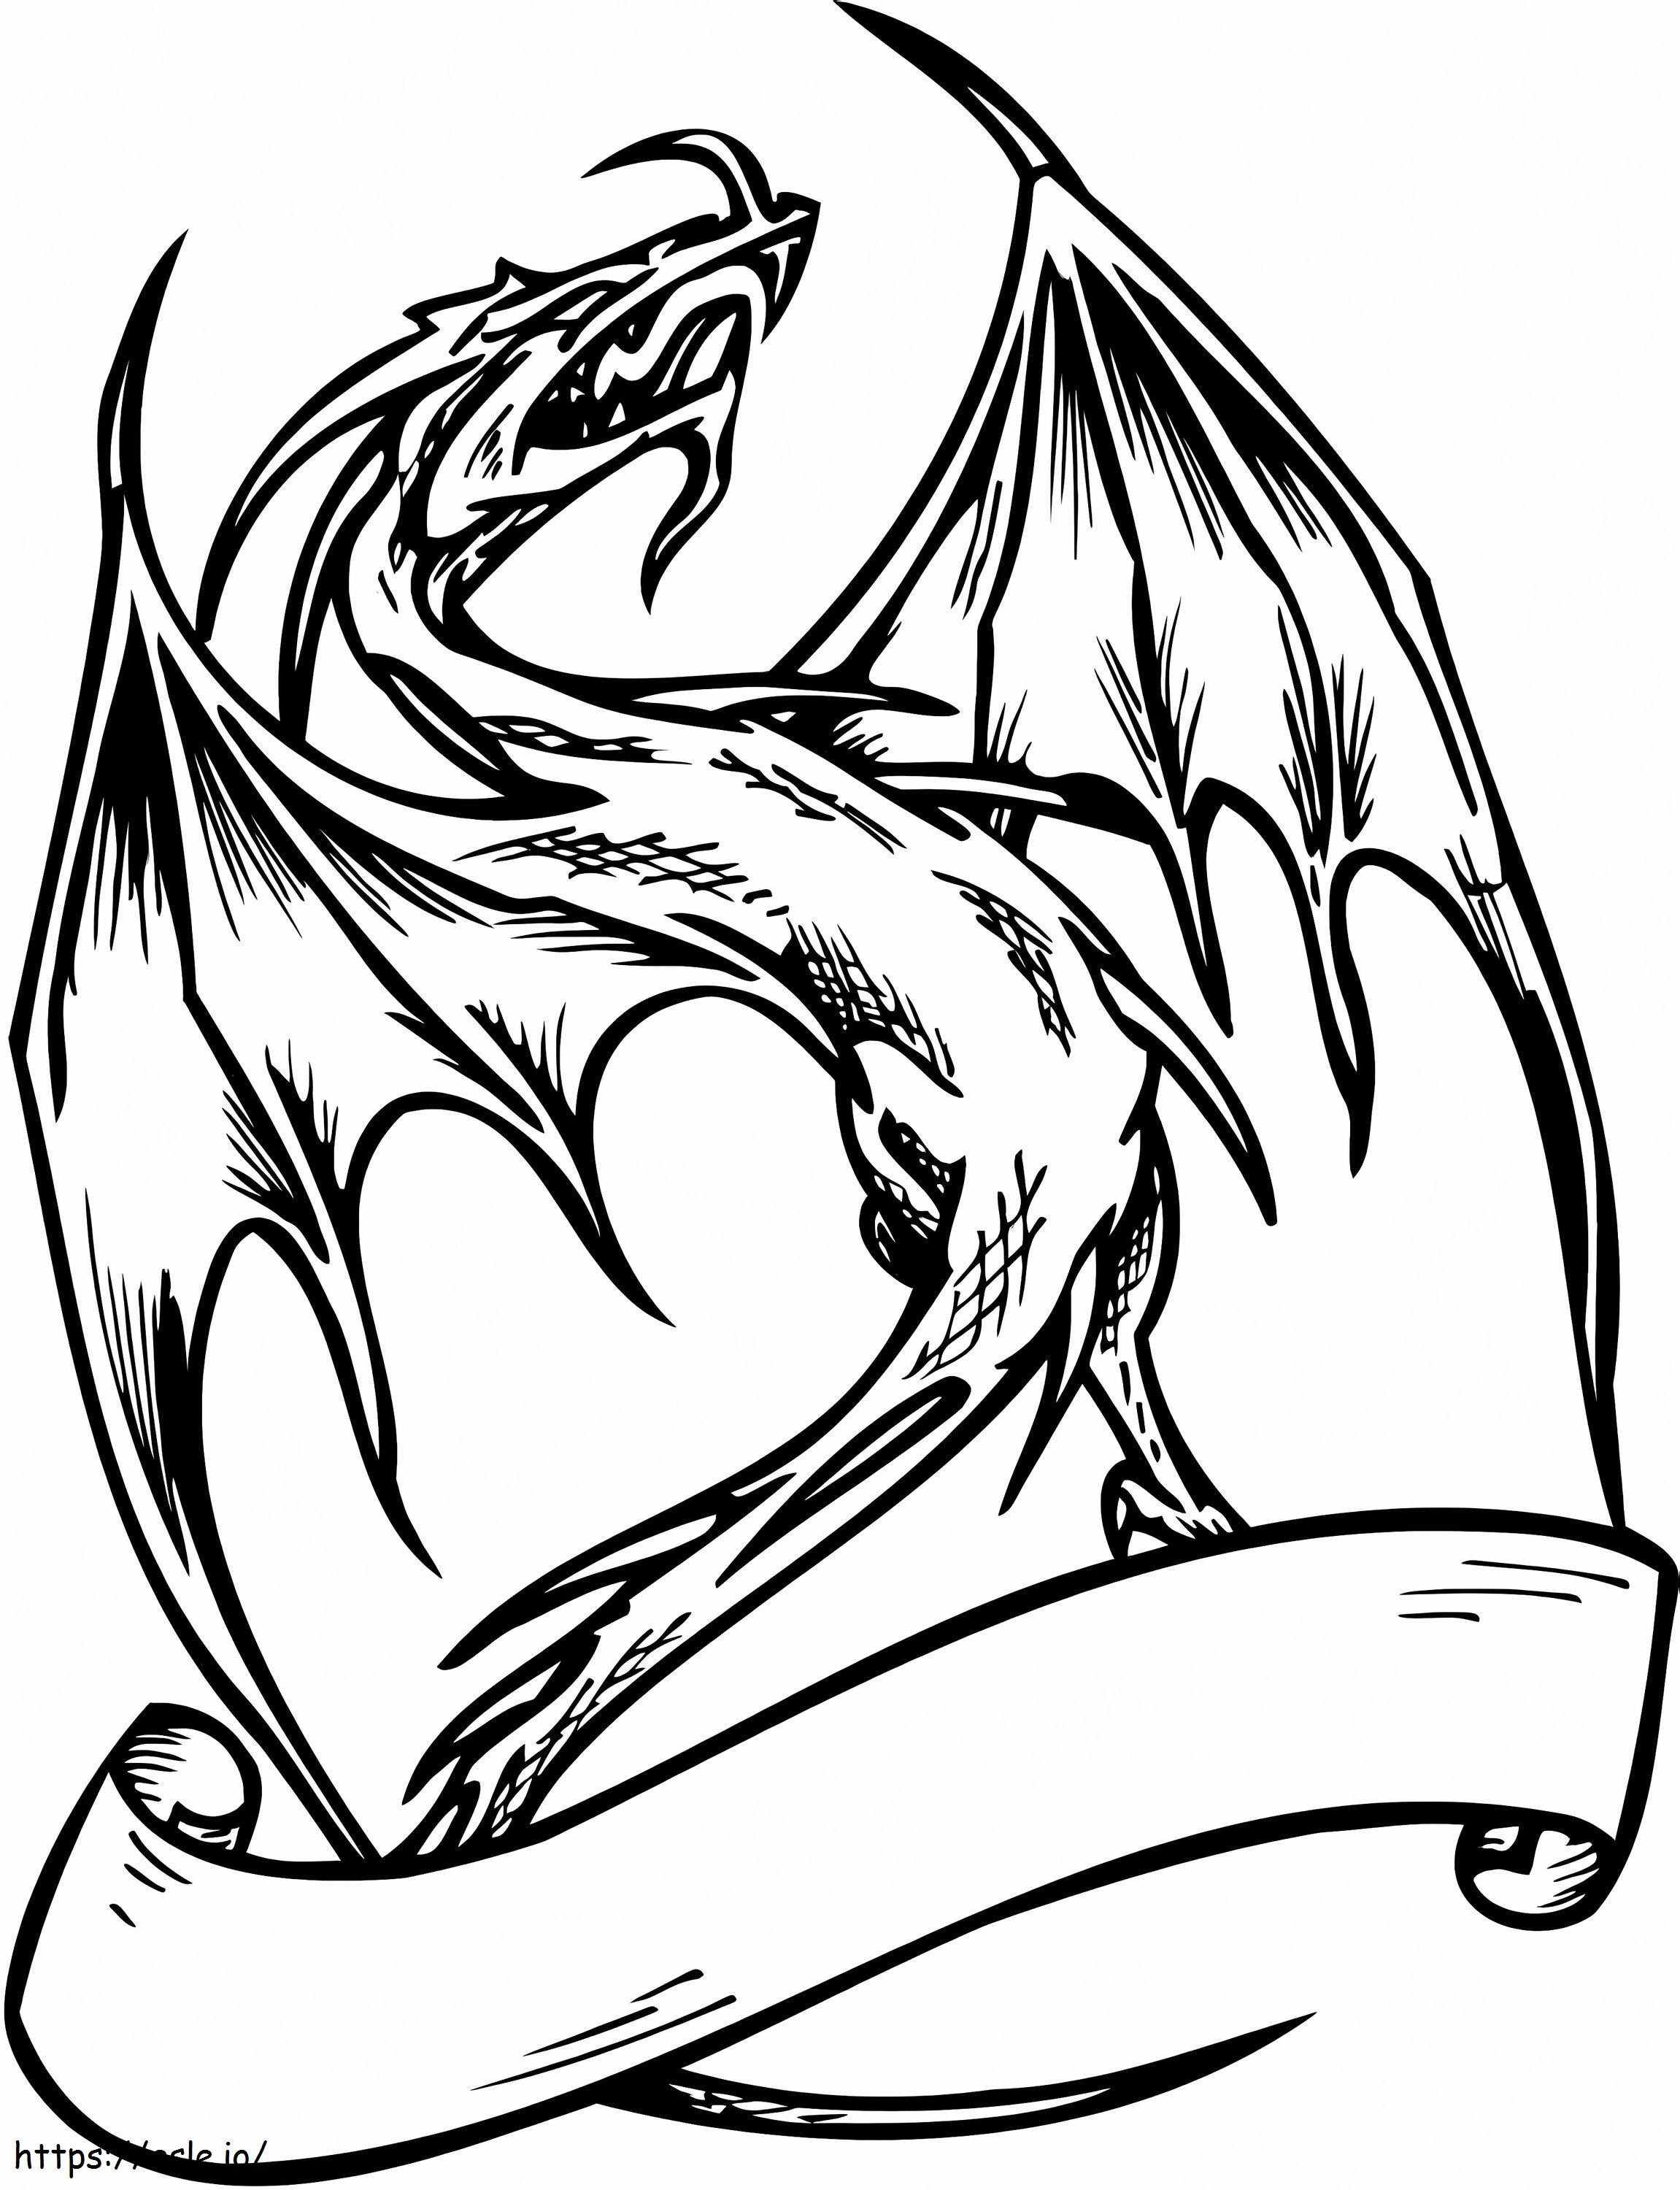 Dragon And Banner coloring page